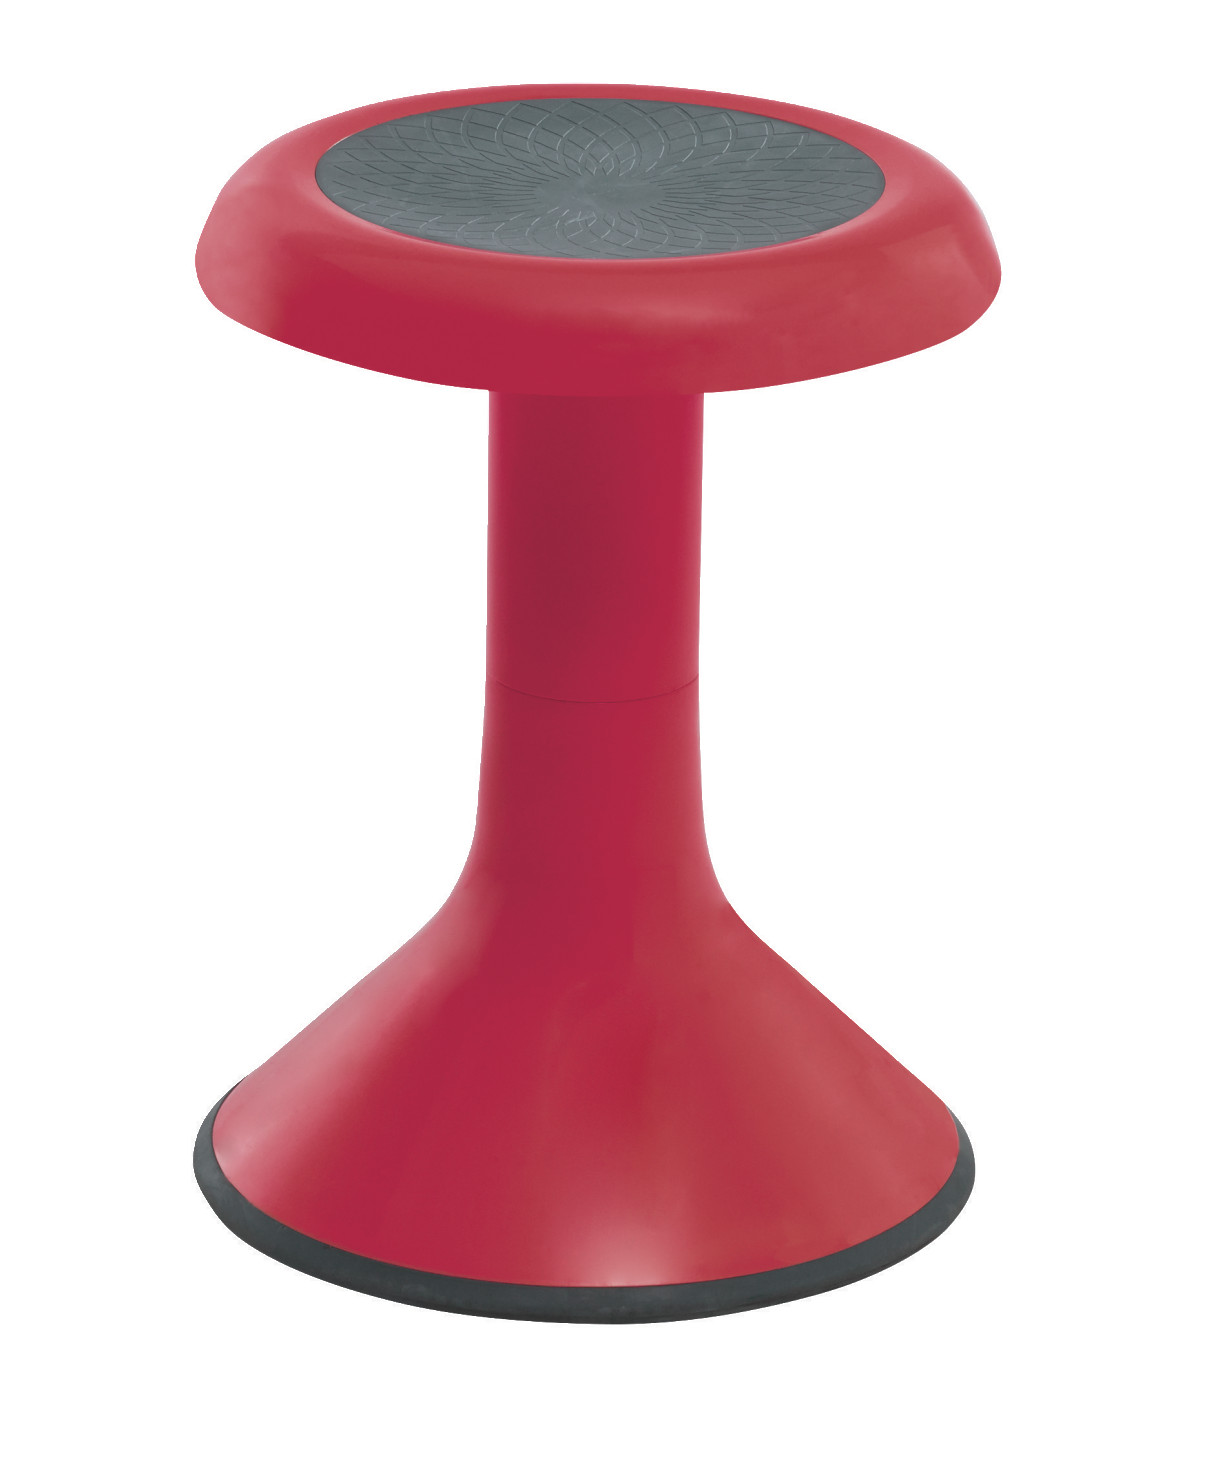 Wobble Chairs for the Classroom Classroom Select Neorok Stool 15 In Seat Seating Classroom